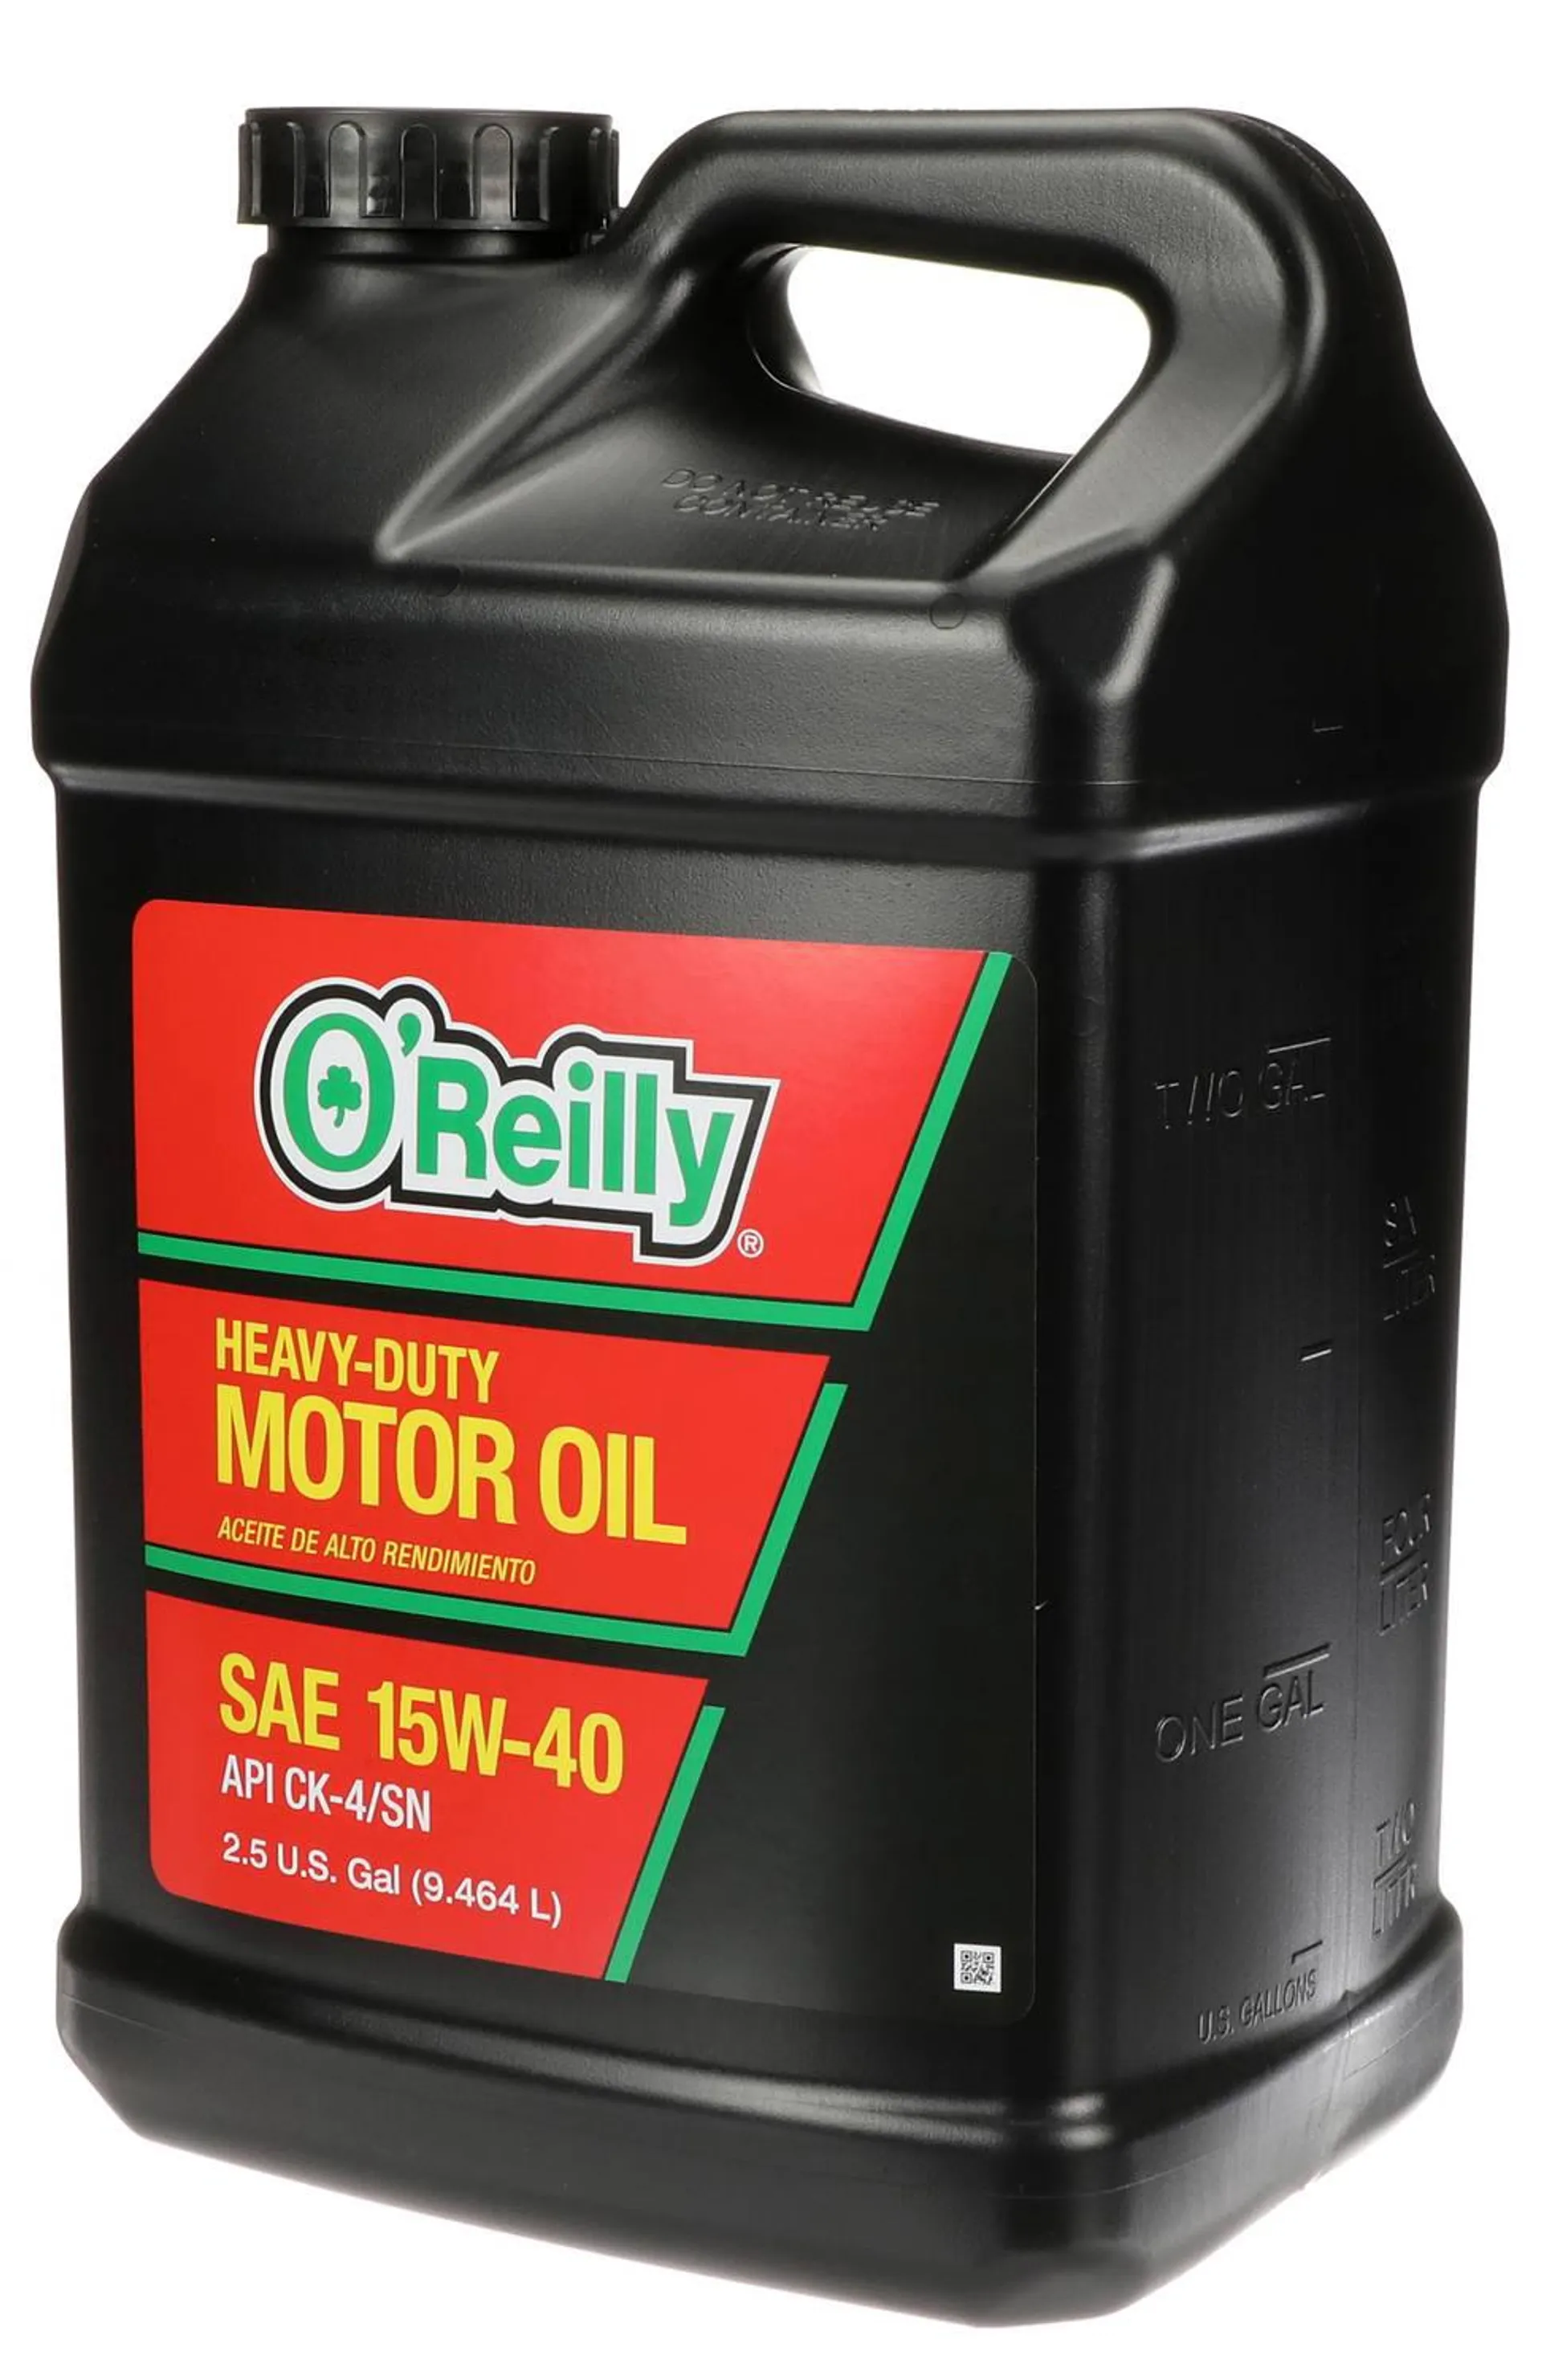 O'Reilly Conventional Diesel Motor Oil 15W-40 2.5 Gallon - 15-40-2.5